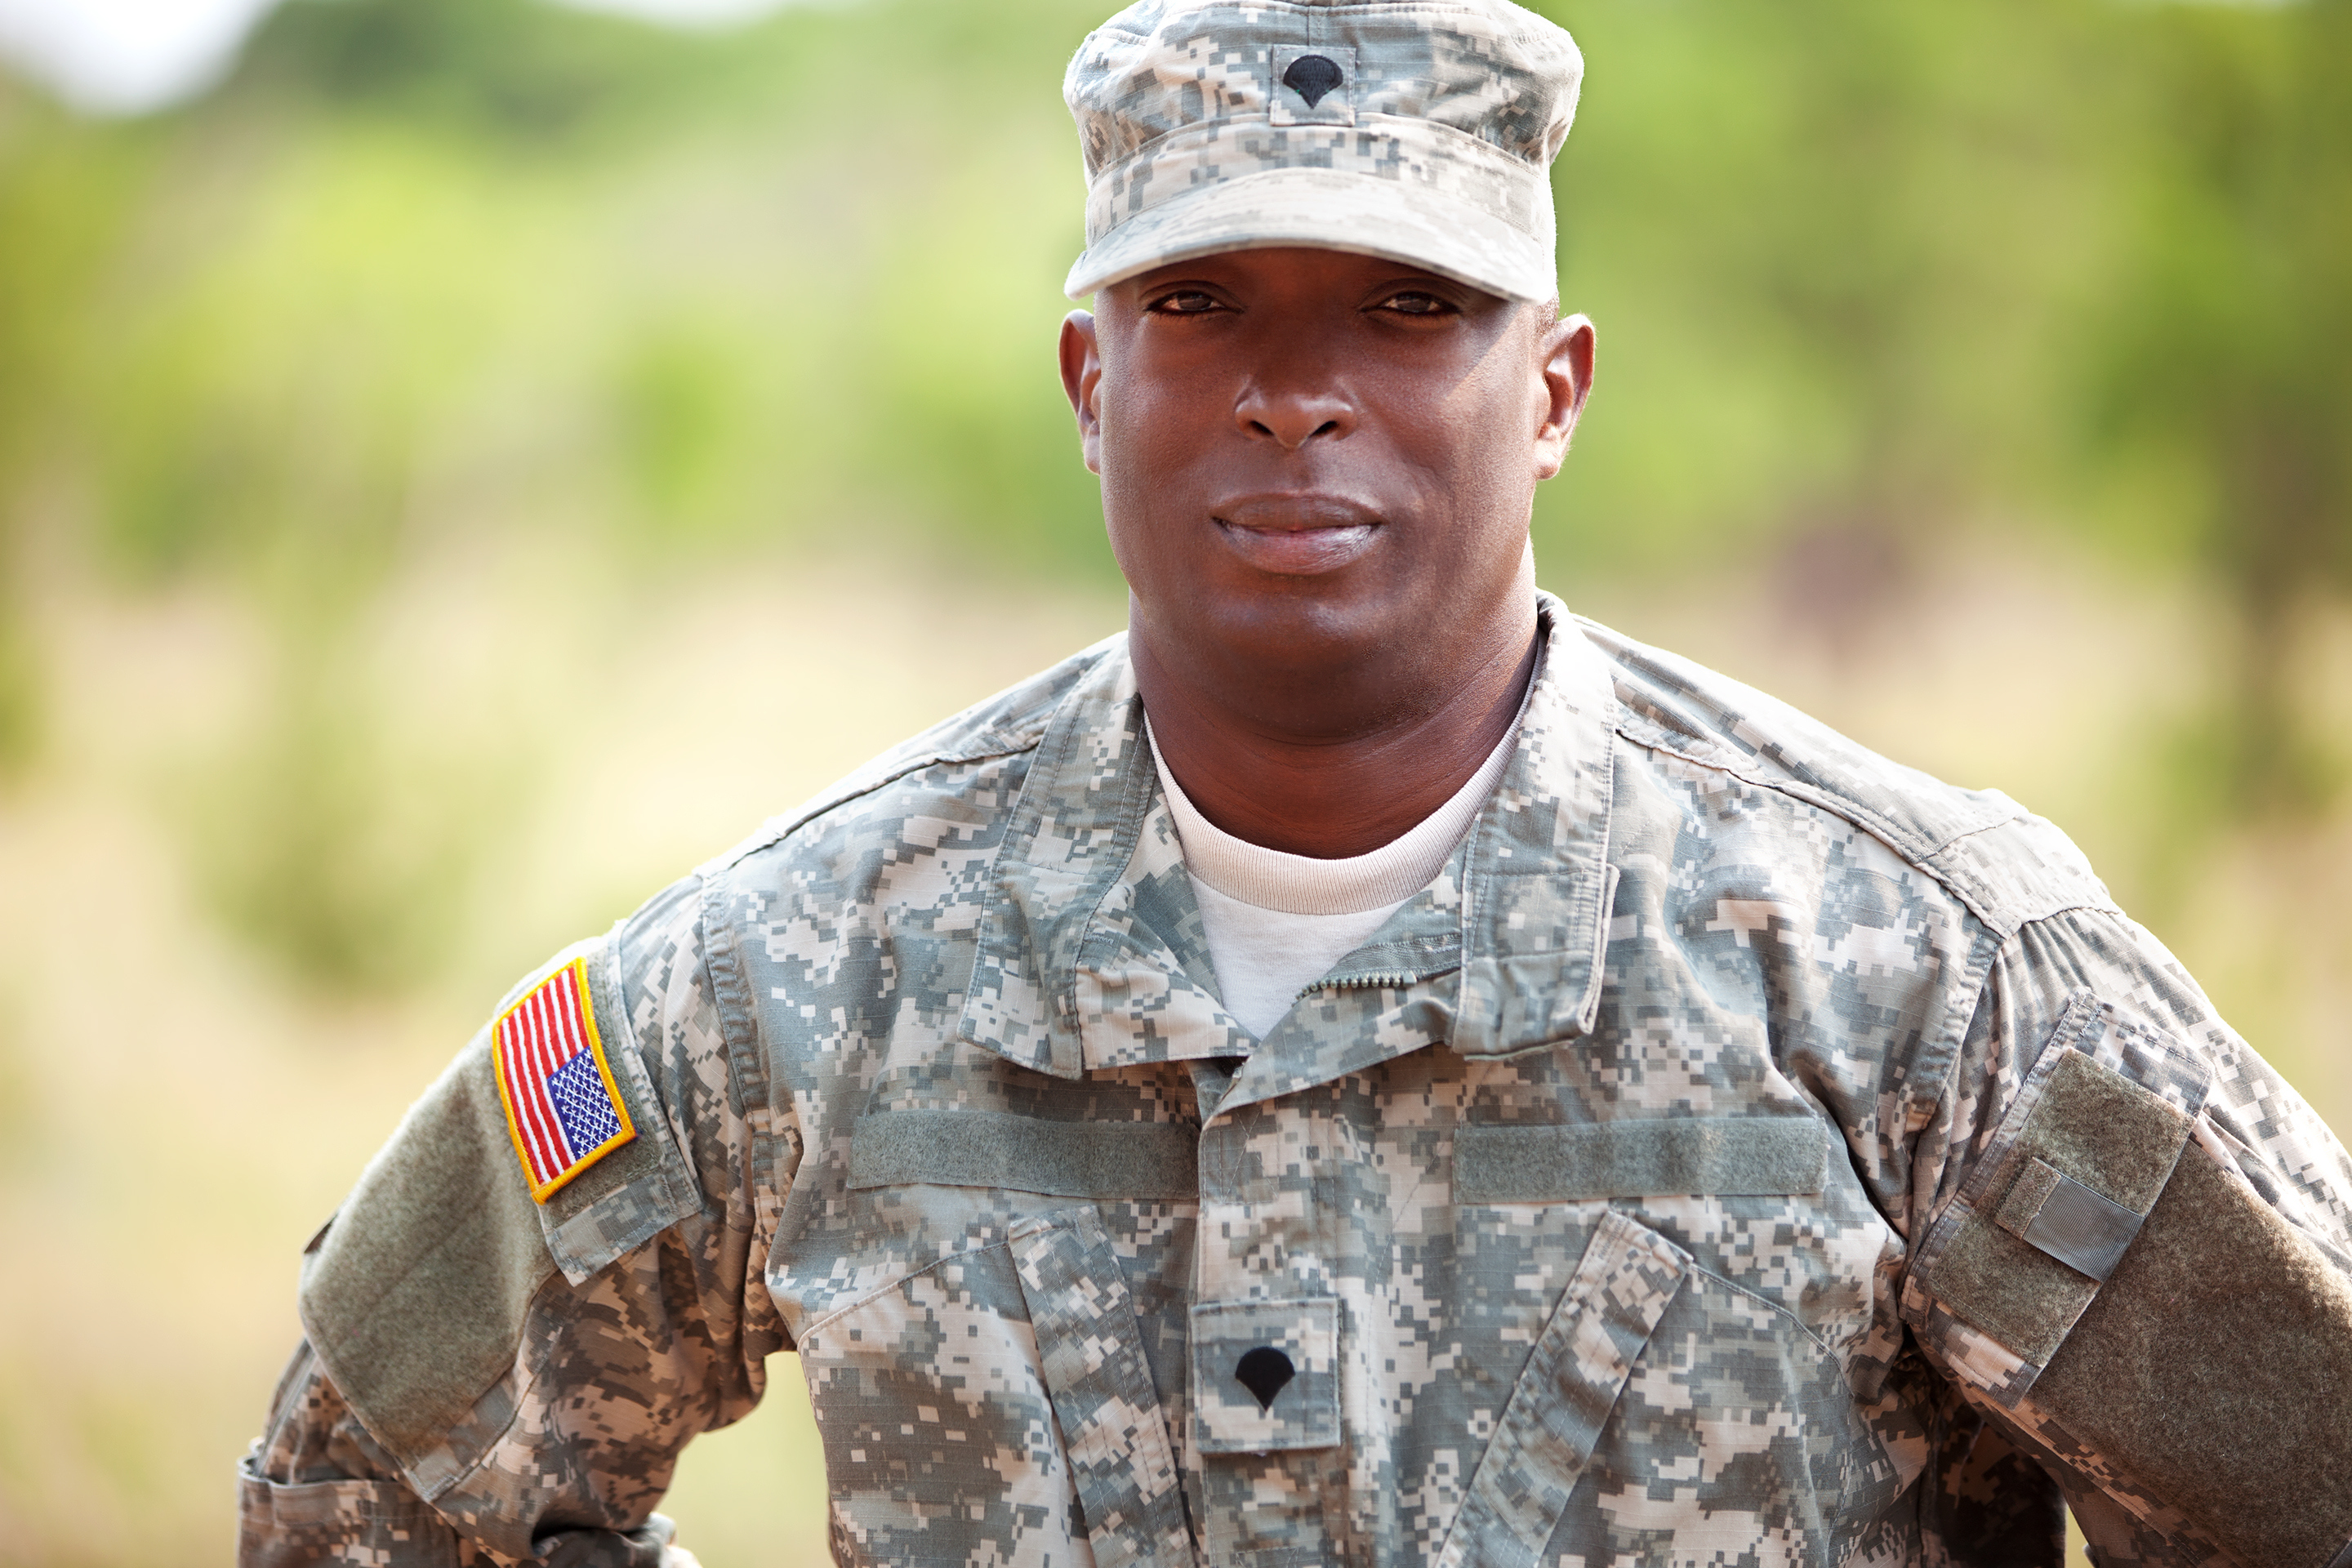 American soldier in army combat uniform or ACU outdoor.